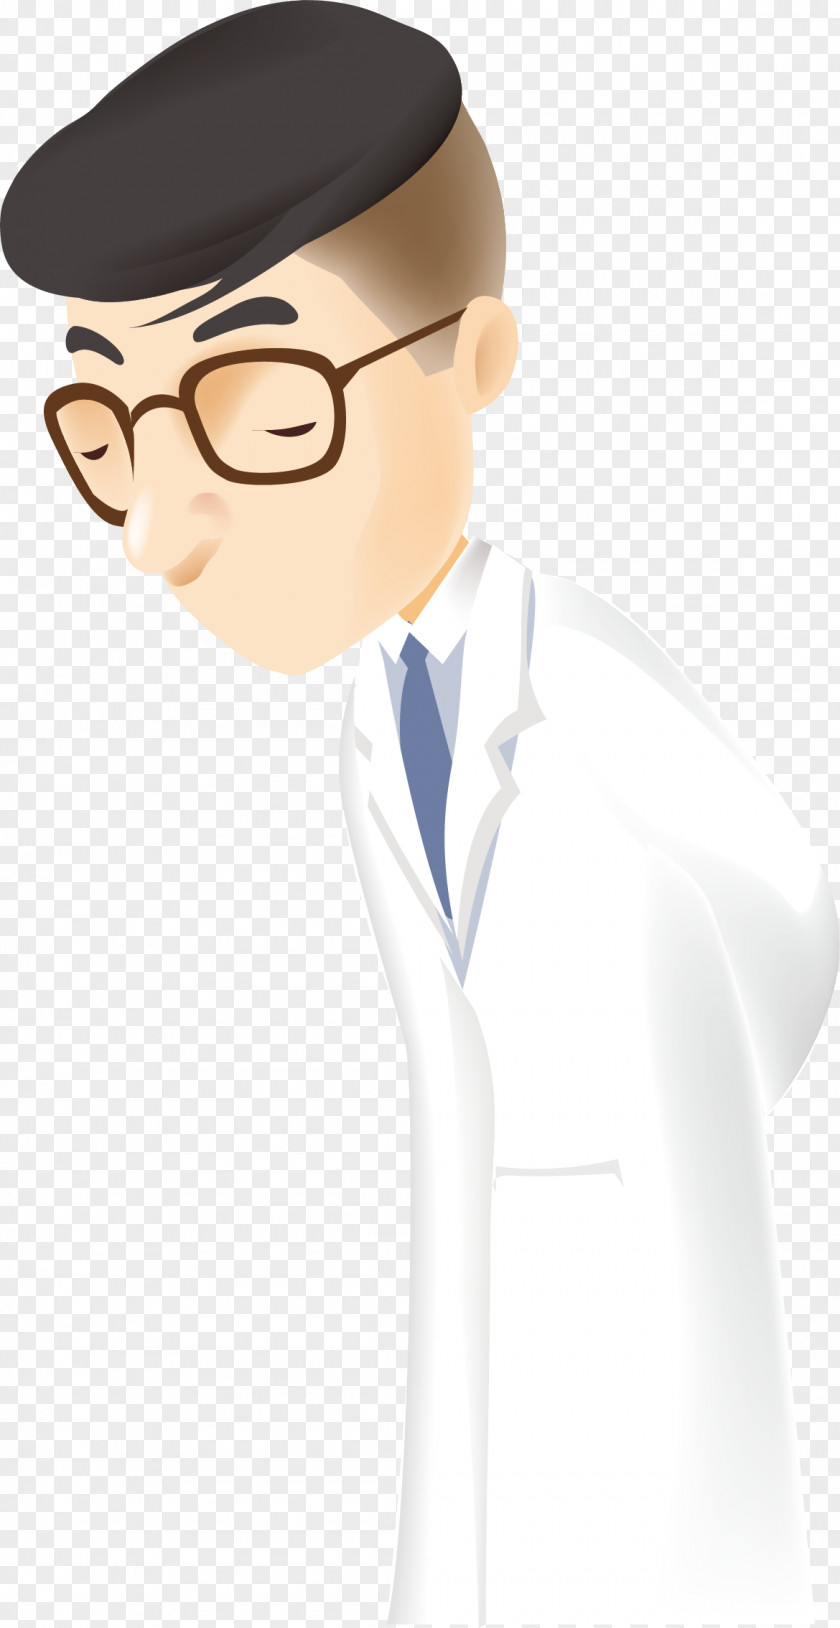 A Tired Doctor Physician Cartoon Illustration PNG